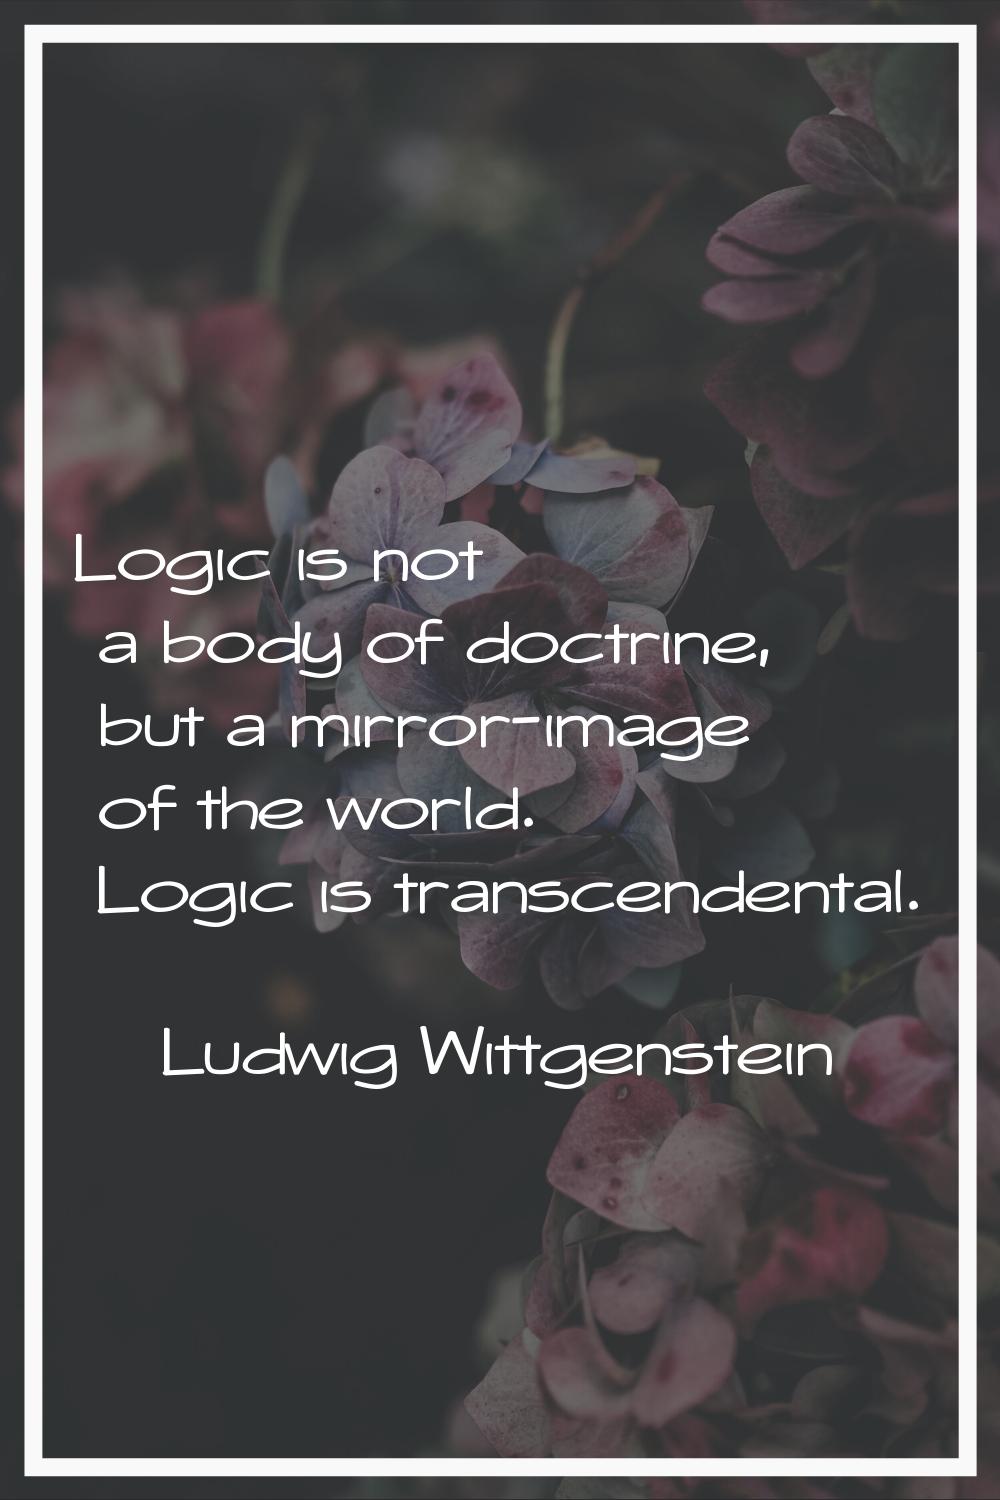 Logic is not a body of doctrine, but a mirror-image of the world. Logic is transcendental.